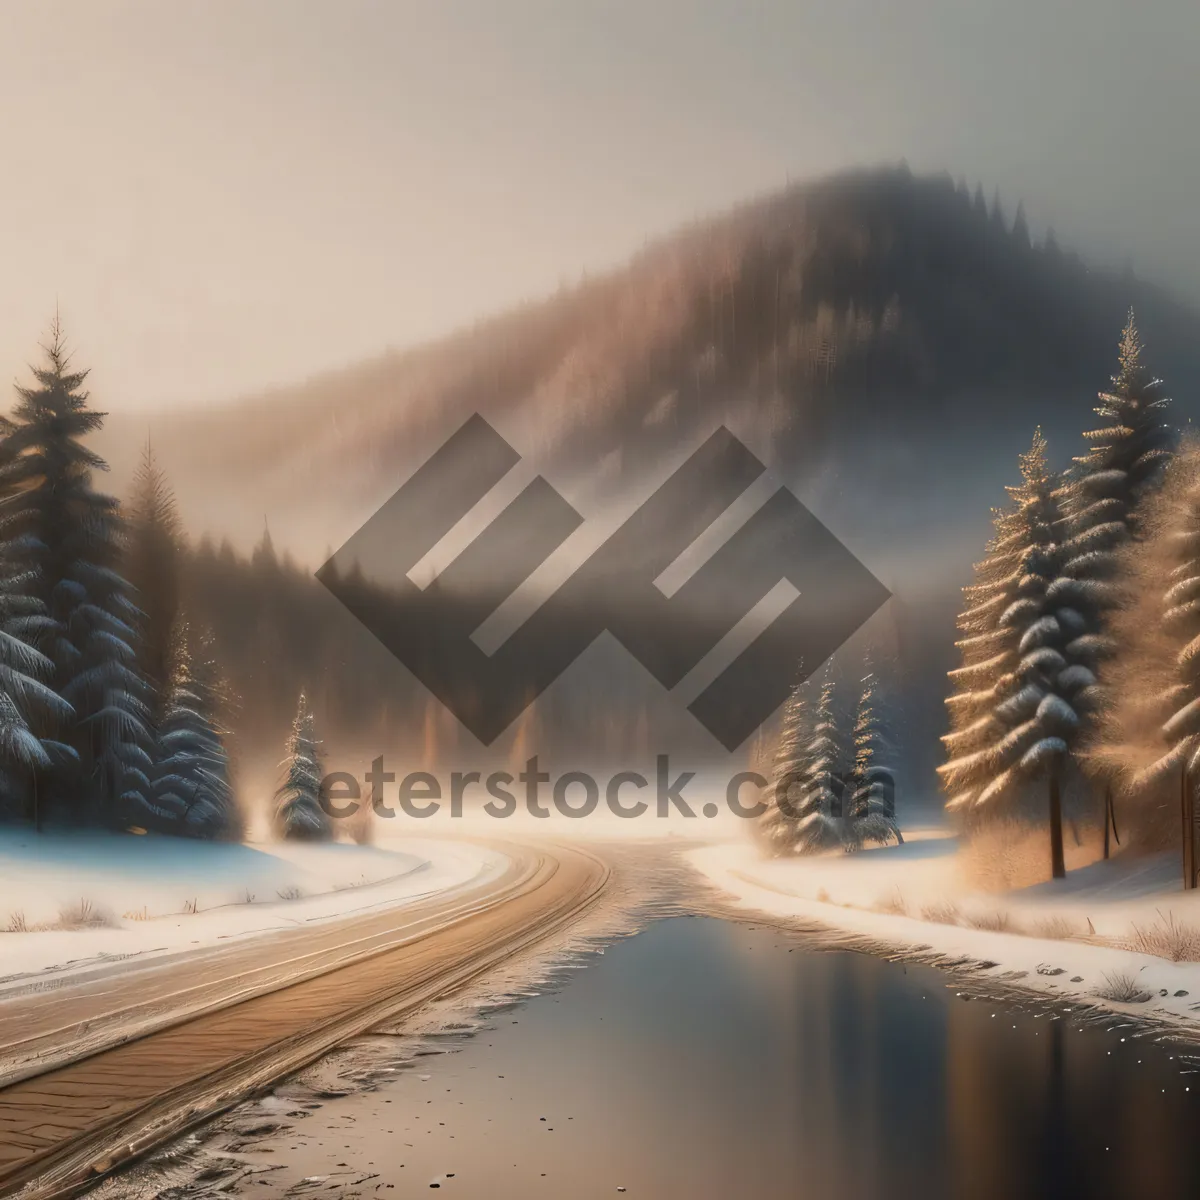 Picture of Winter Wonderland: Majestic Snowy Mountain Landscape in Evergreen Forest